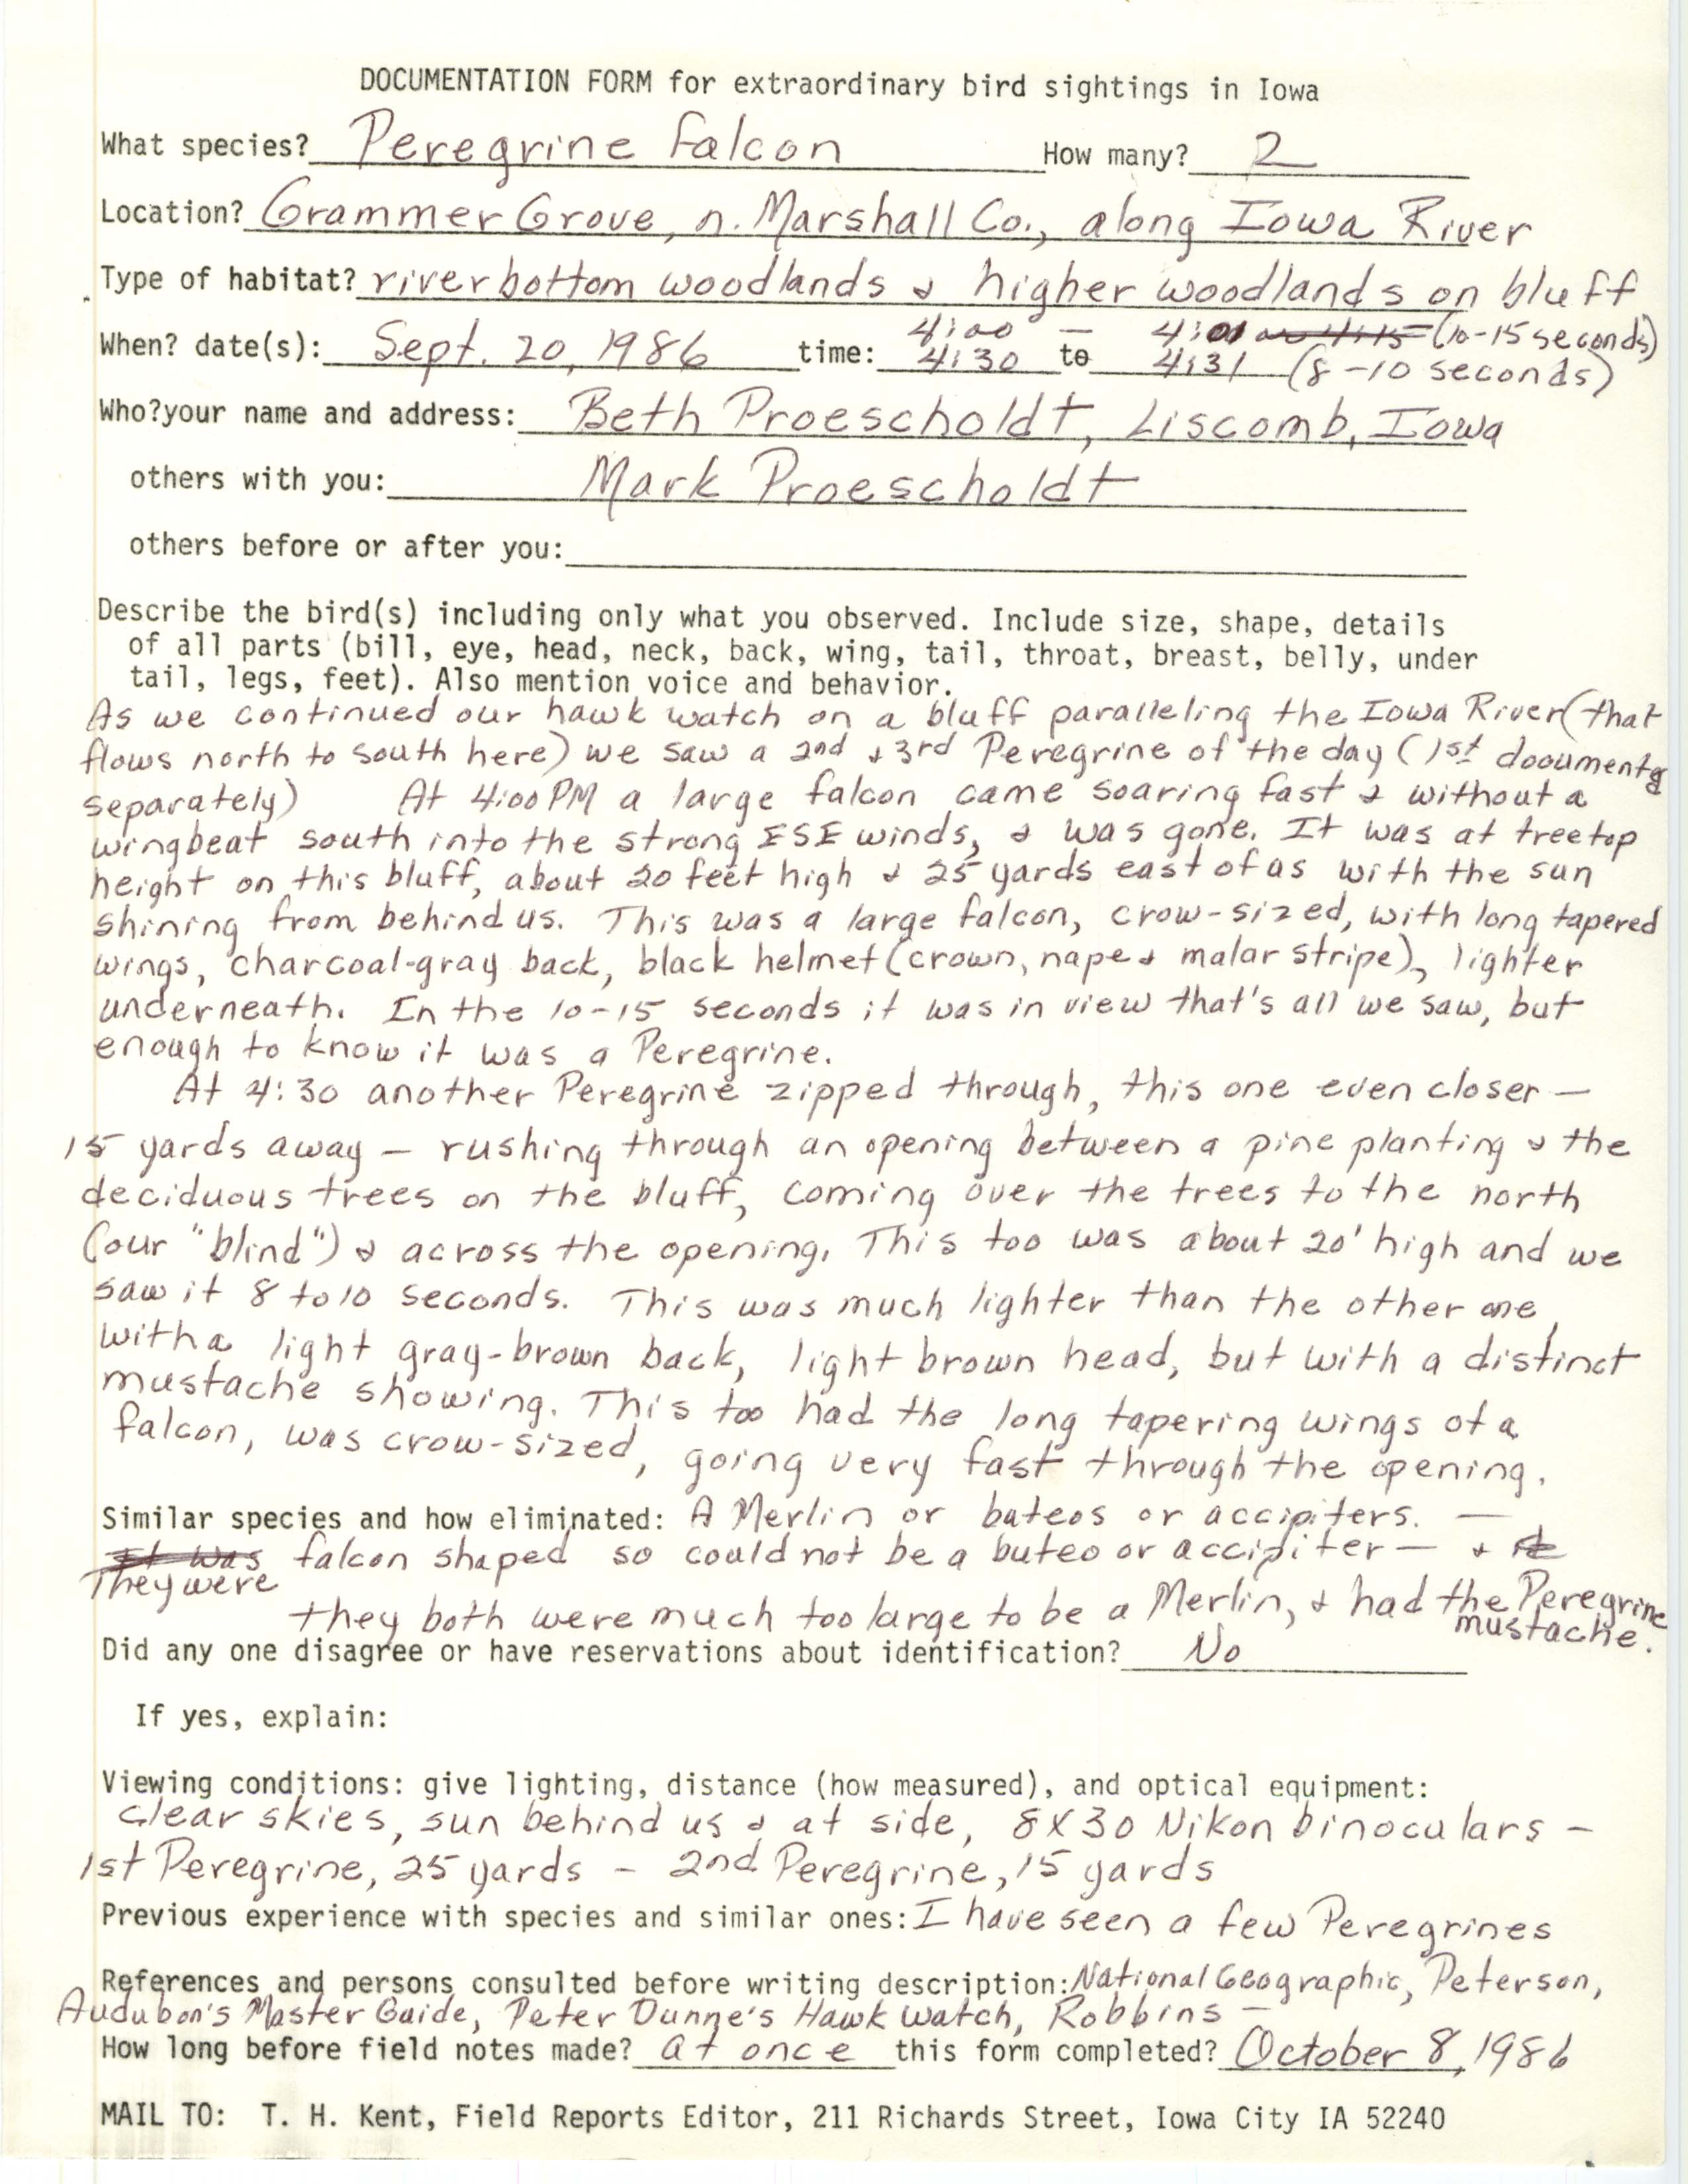 Rare bird documentation form for Peregrine Falcon at Grammer Grove in 1986